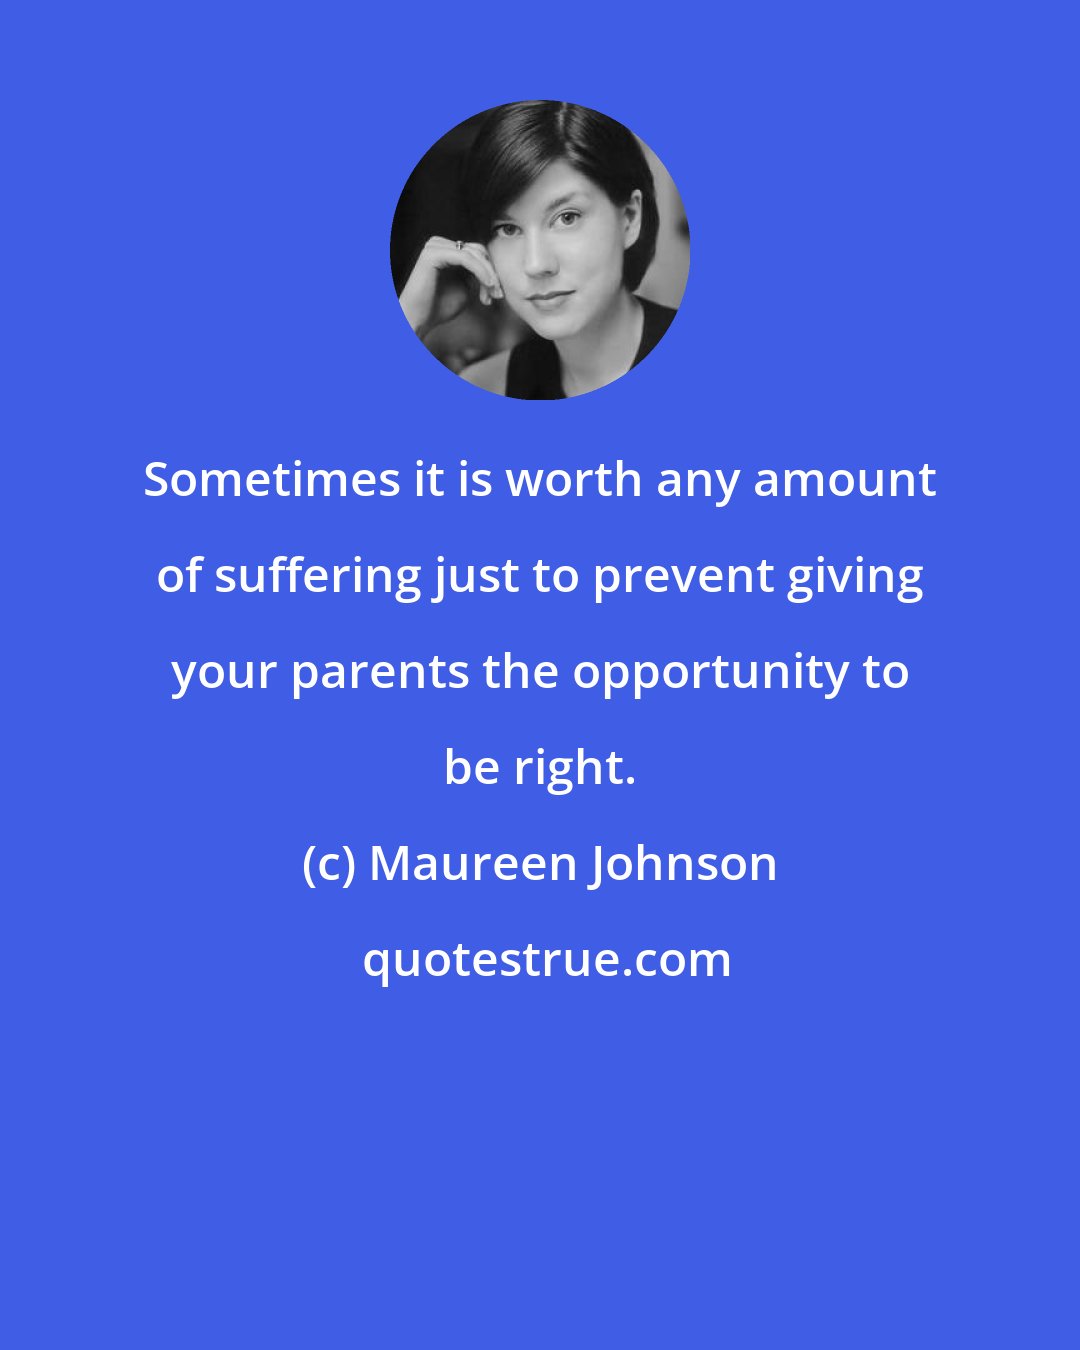 Maureen Johnson: Sometimes it is worth any amount of suffering just to prevent giving your parents the opportunity to be right.